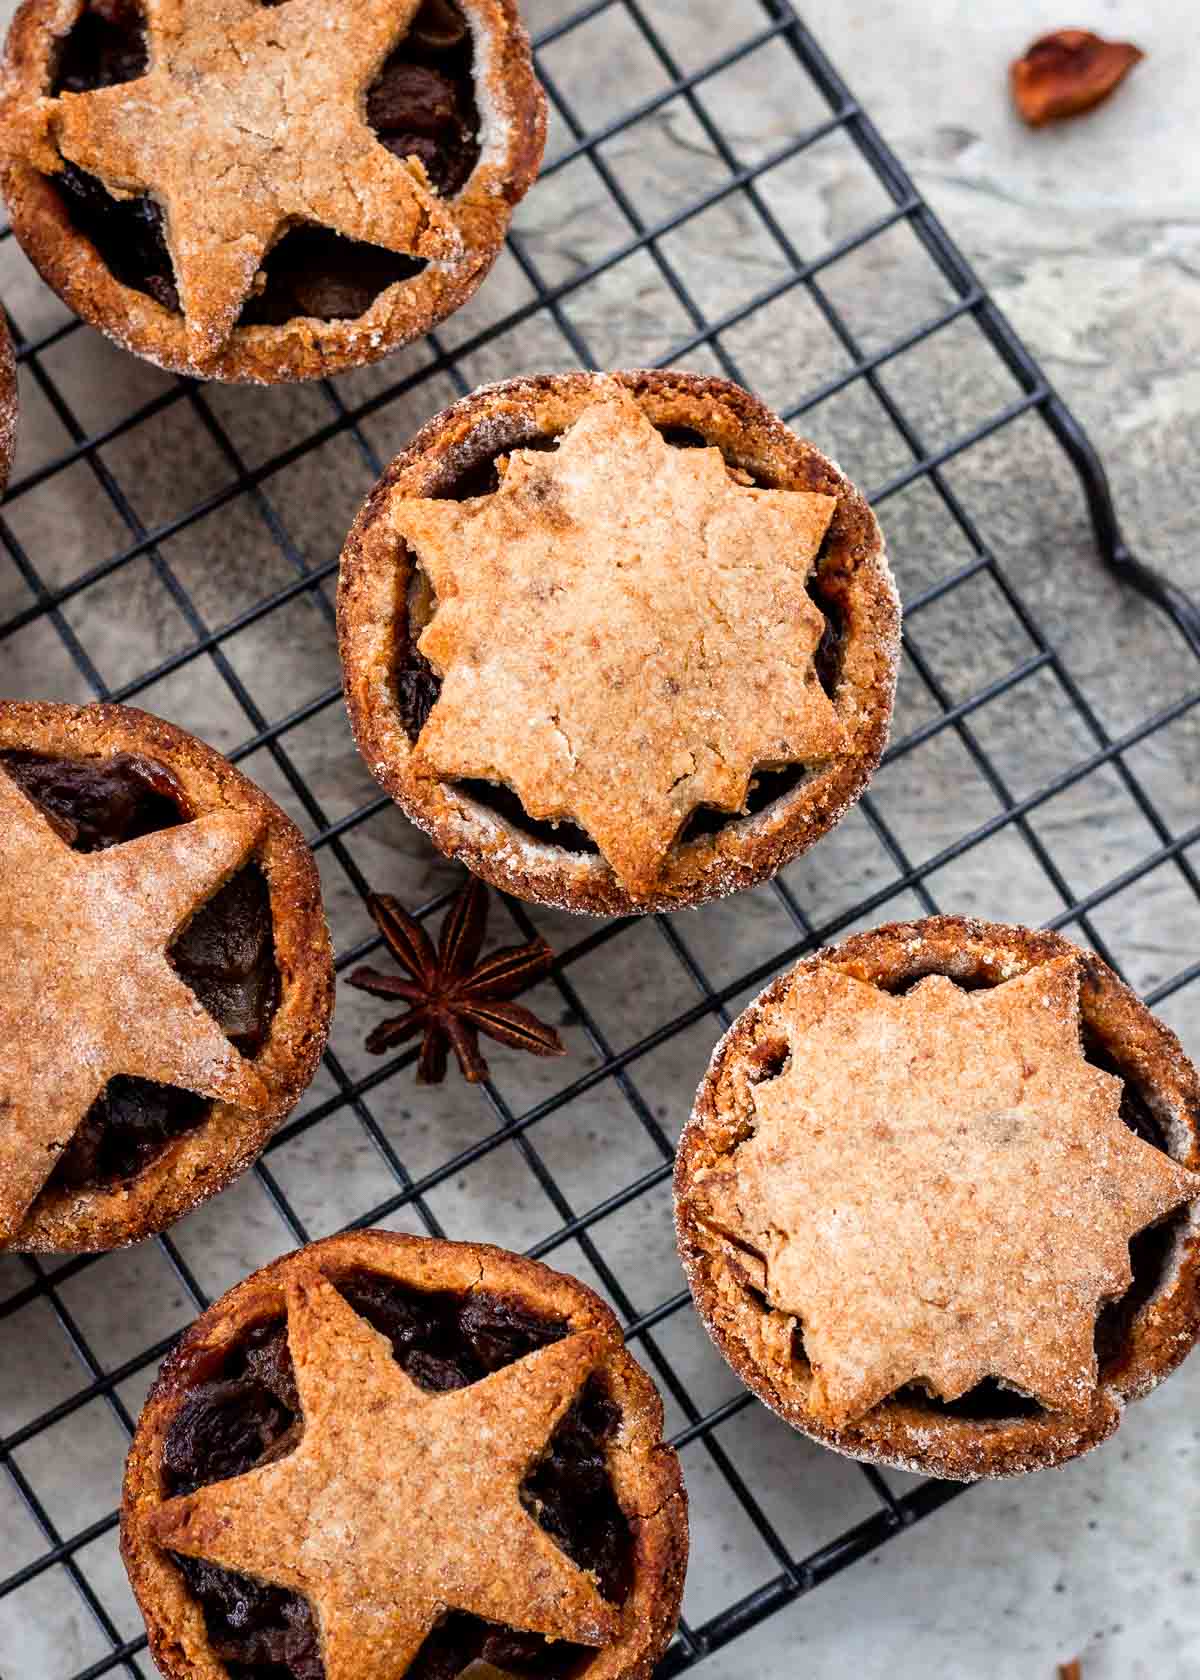 Festive mince pies with pastry stars sit cooling on rack.